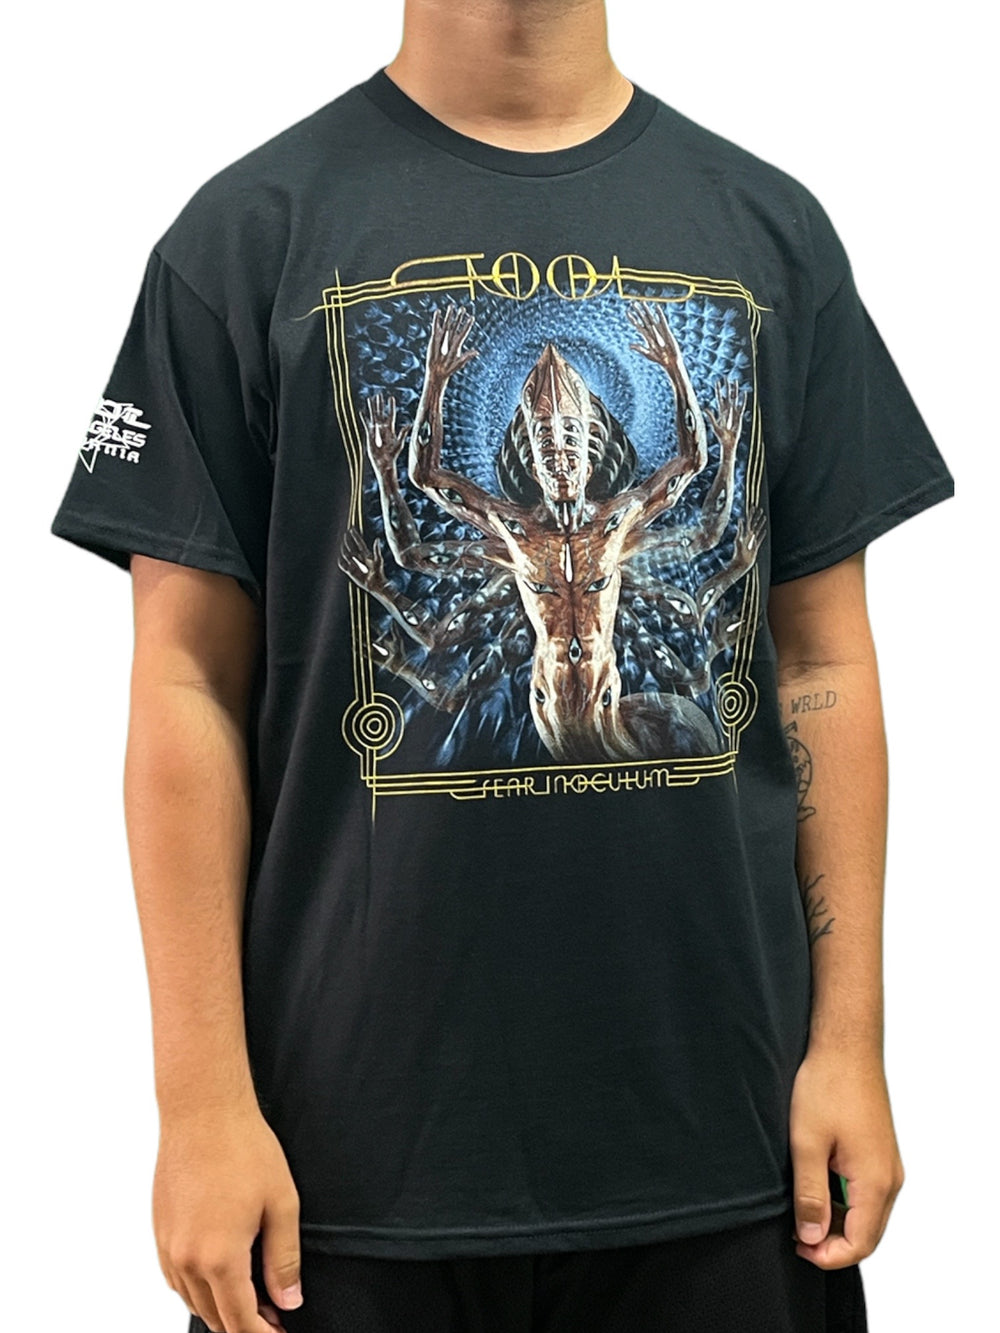 Tool Being Fear Inoculum Official T Shirt Brand New Various Sizes Arm Printed